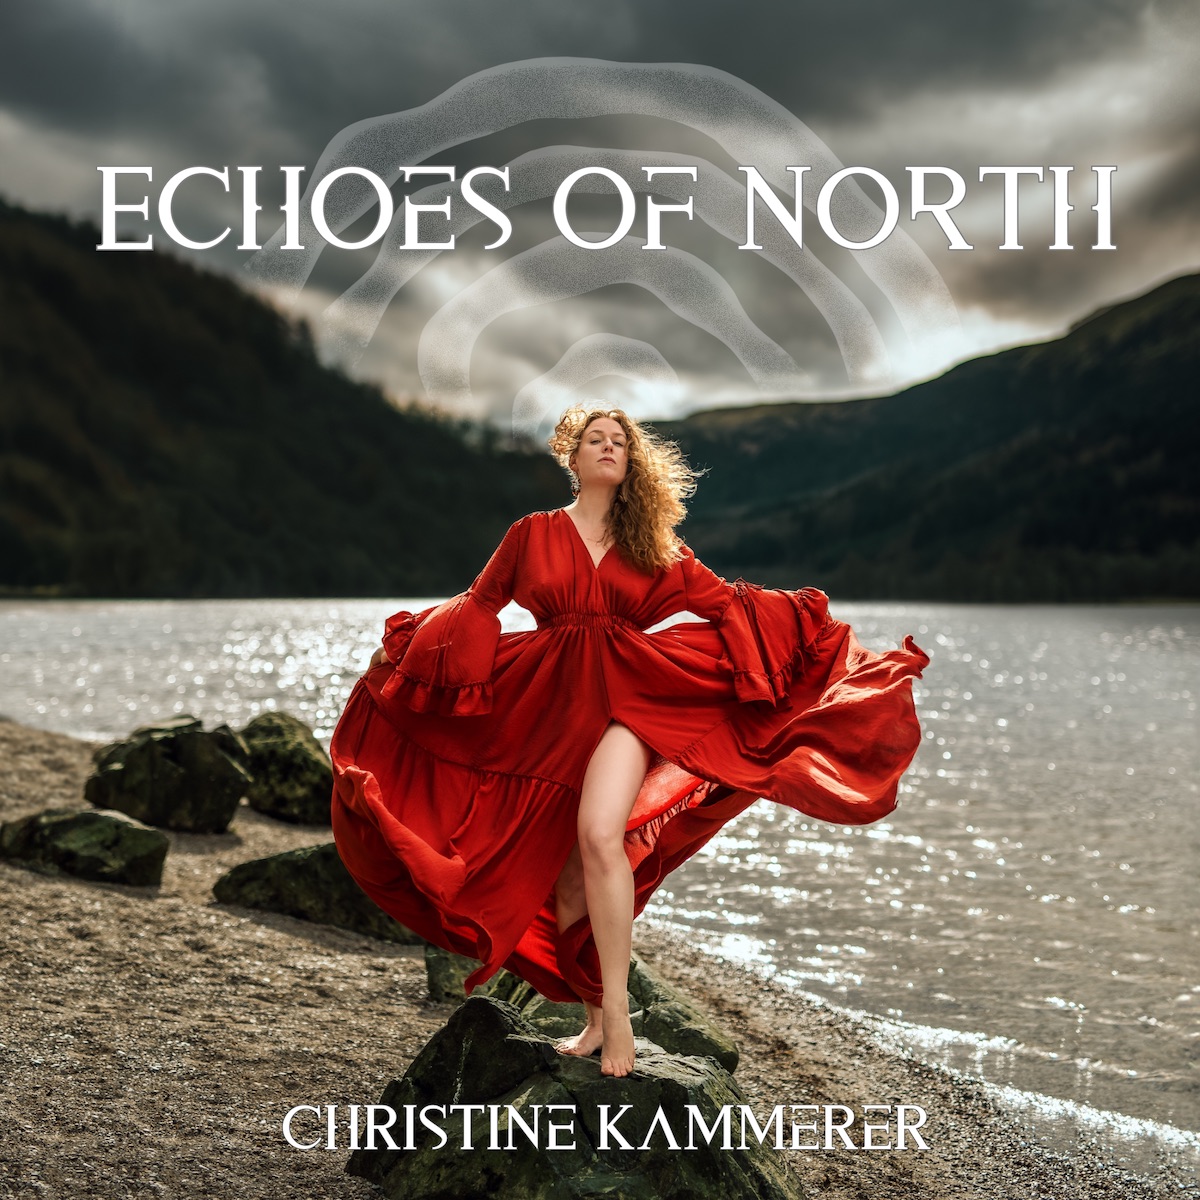 DEBUT ALBUM REVIEW: Echoes of North by Christine Kammerer